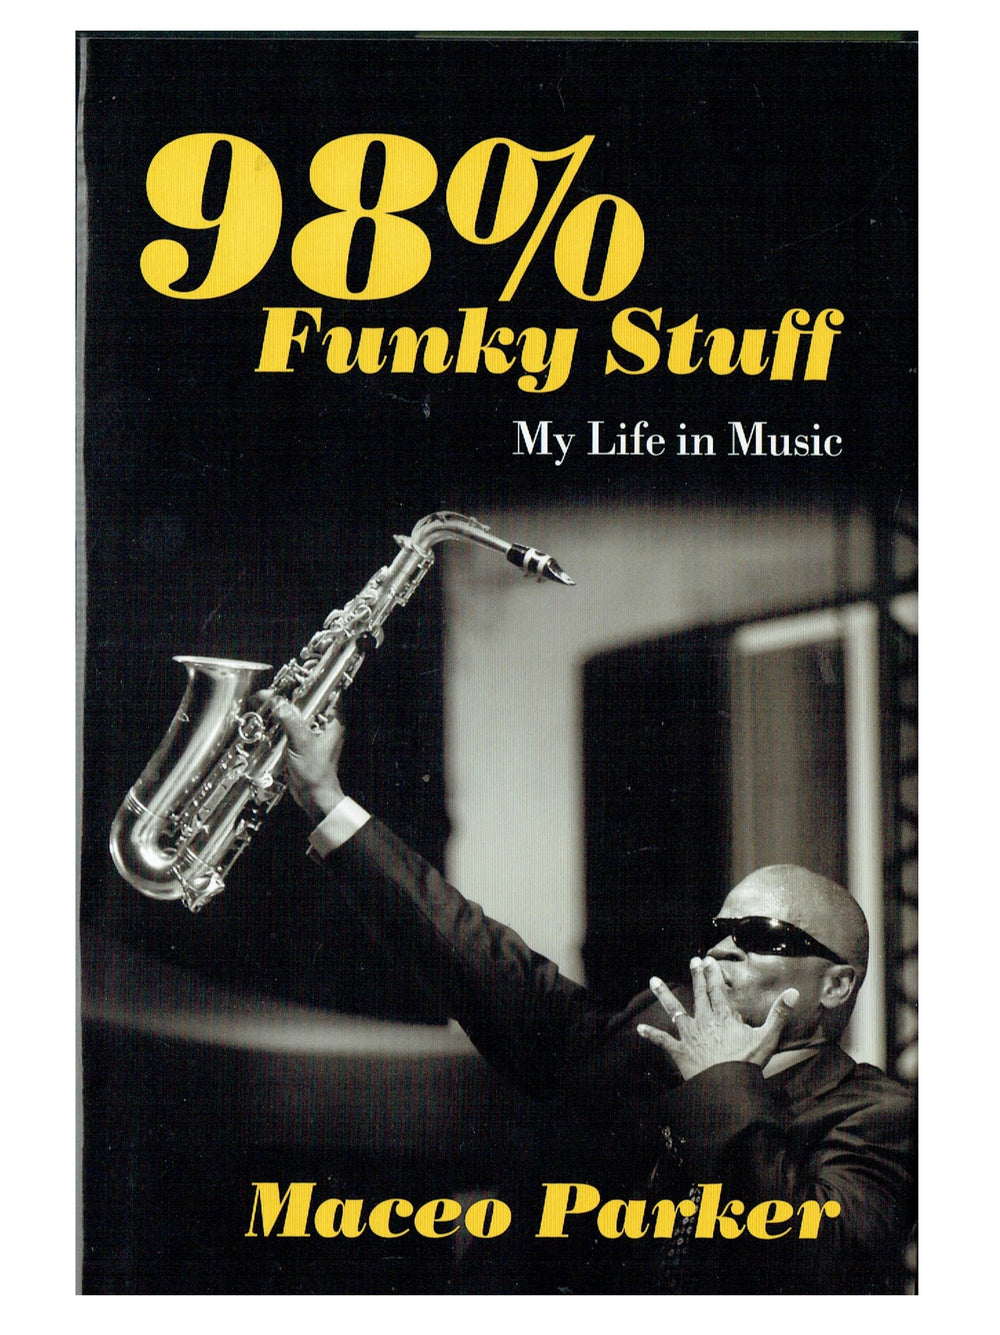 Prince – Maceo Parker 98% Funky Stuff Hardback Book Prince MINT AS NEW SIGNED